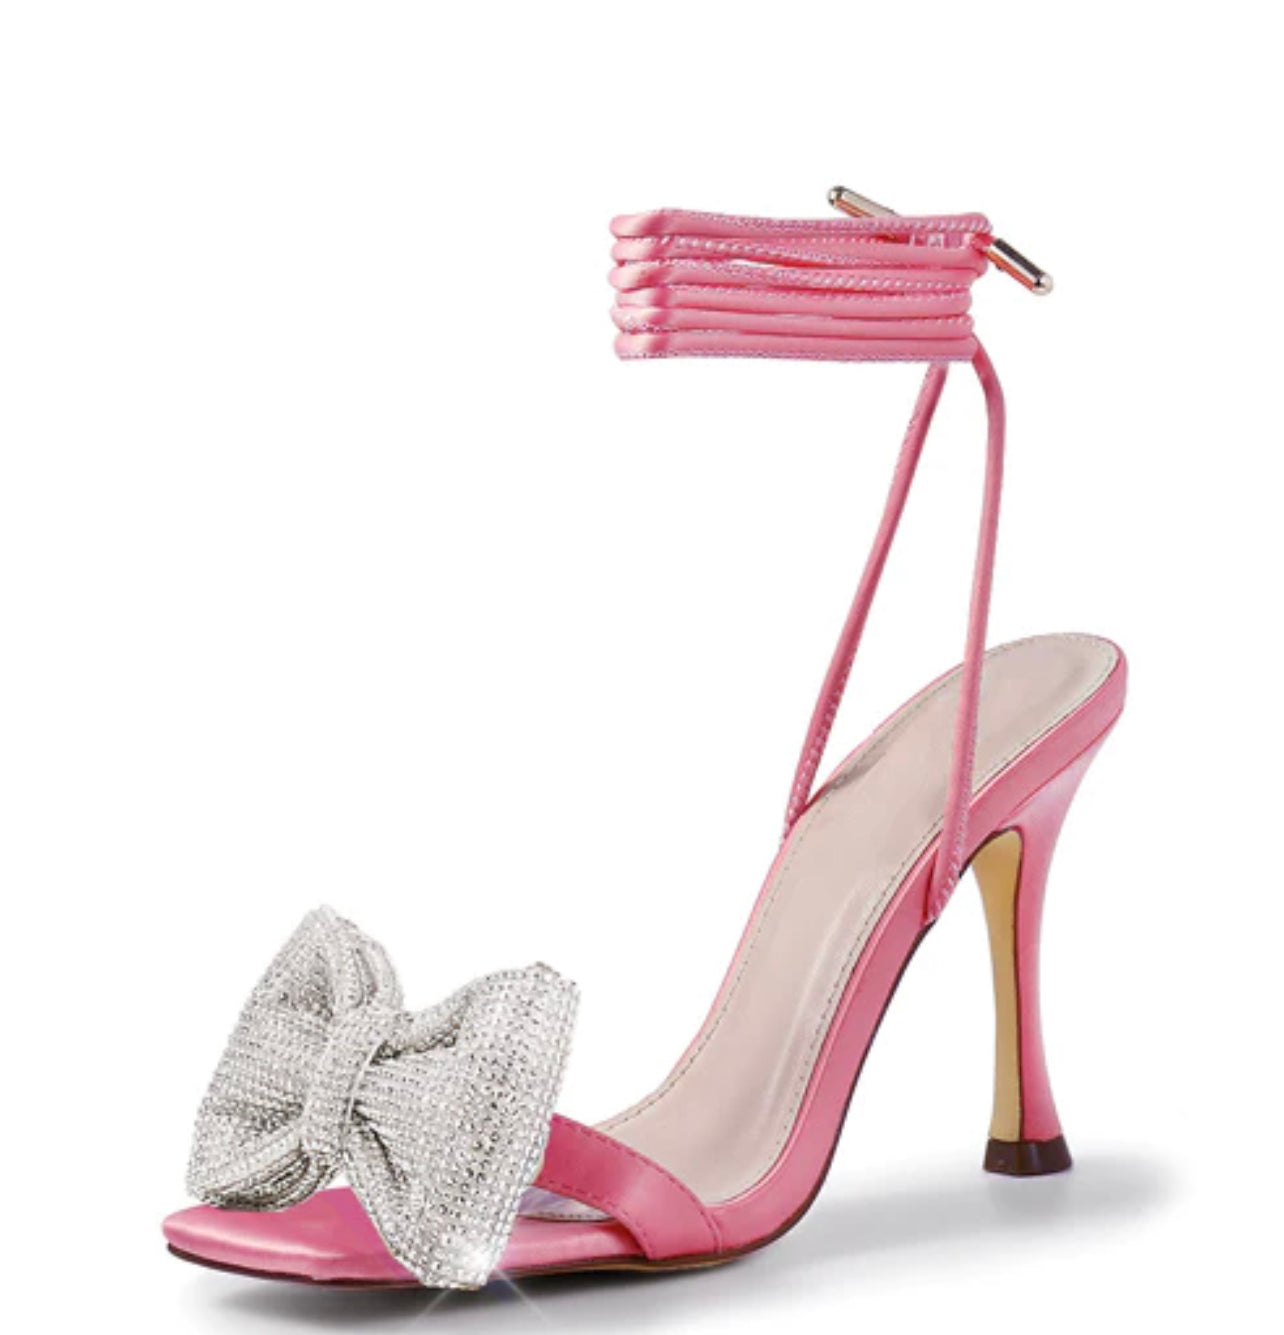 CHANEL, Shoes, Chanel Pink Bow Heels